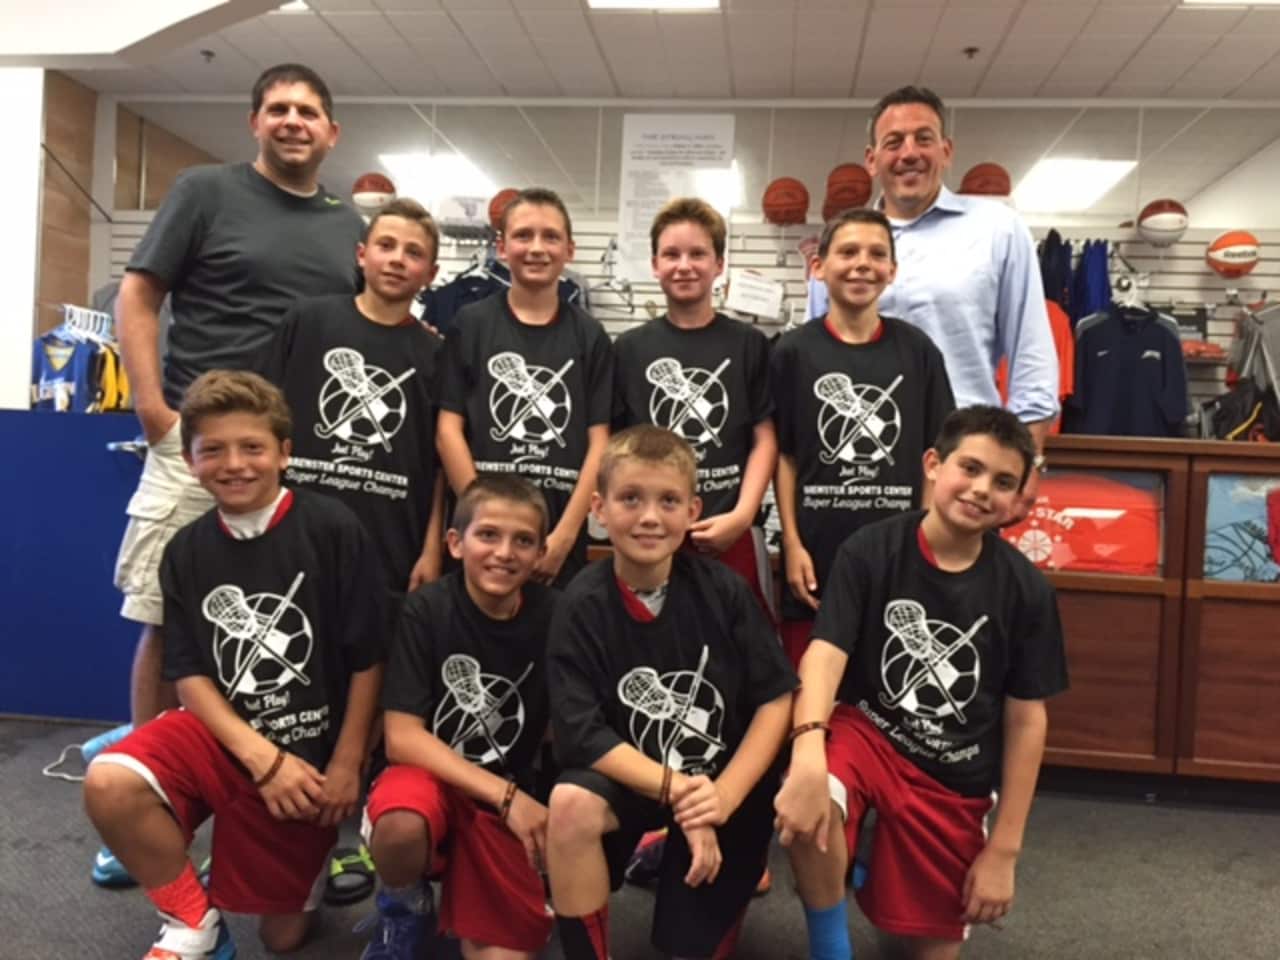 Somers Fifth Grade Boys won the Brewster Super League A title. Bottom row from left Derek Marcus, Nicky Iocovello, T.J Olifiers, Nick Ferraro. Top row from left Bennett Leitner, Ryan Grant, Max Hechler, Jake Riina. CoachMike Ferraro, Kevin Marcus